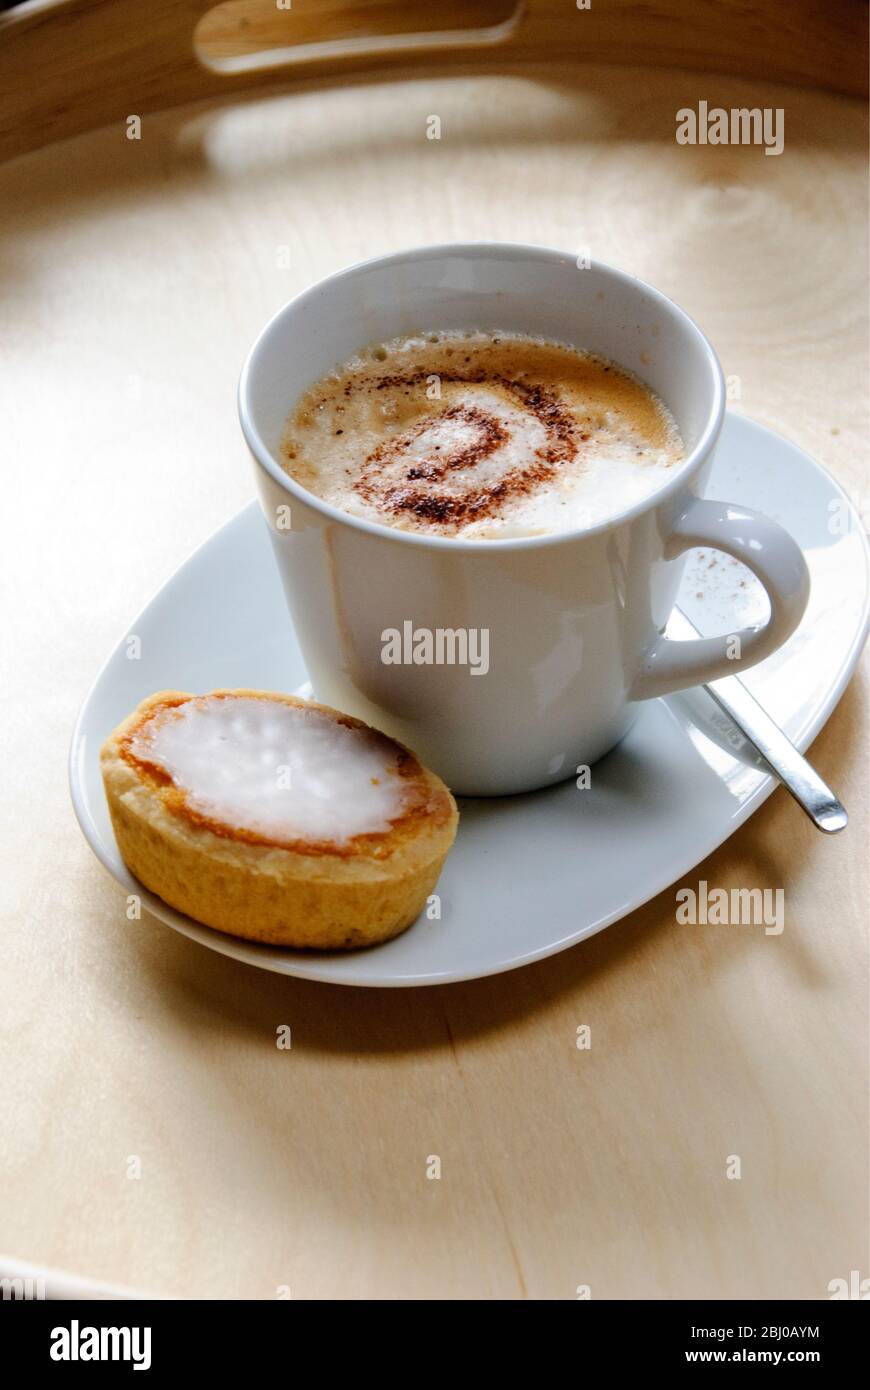 Cup of cappuccino with spiral of cocoa dusted on top with Swedish almond tart - Stock Photo